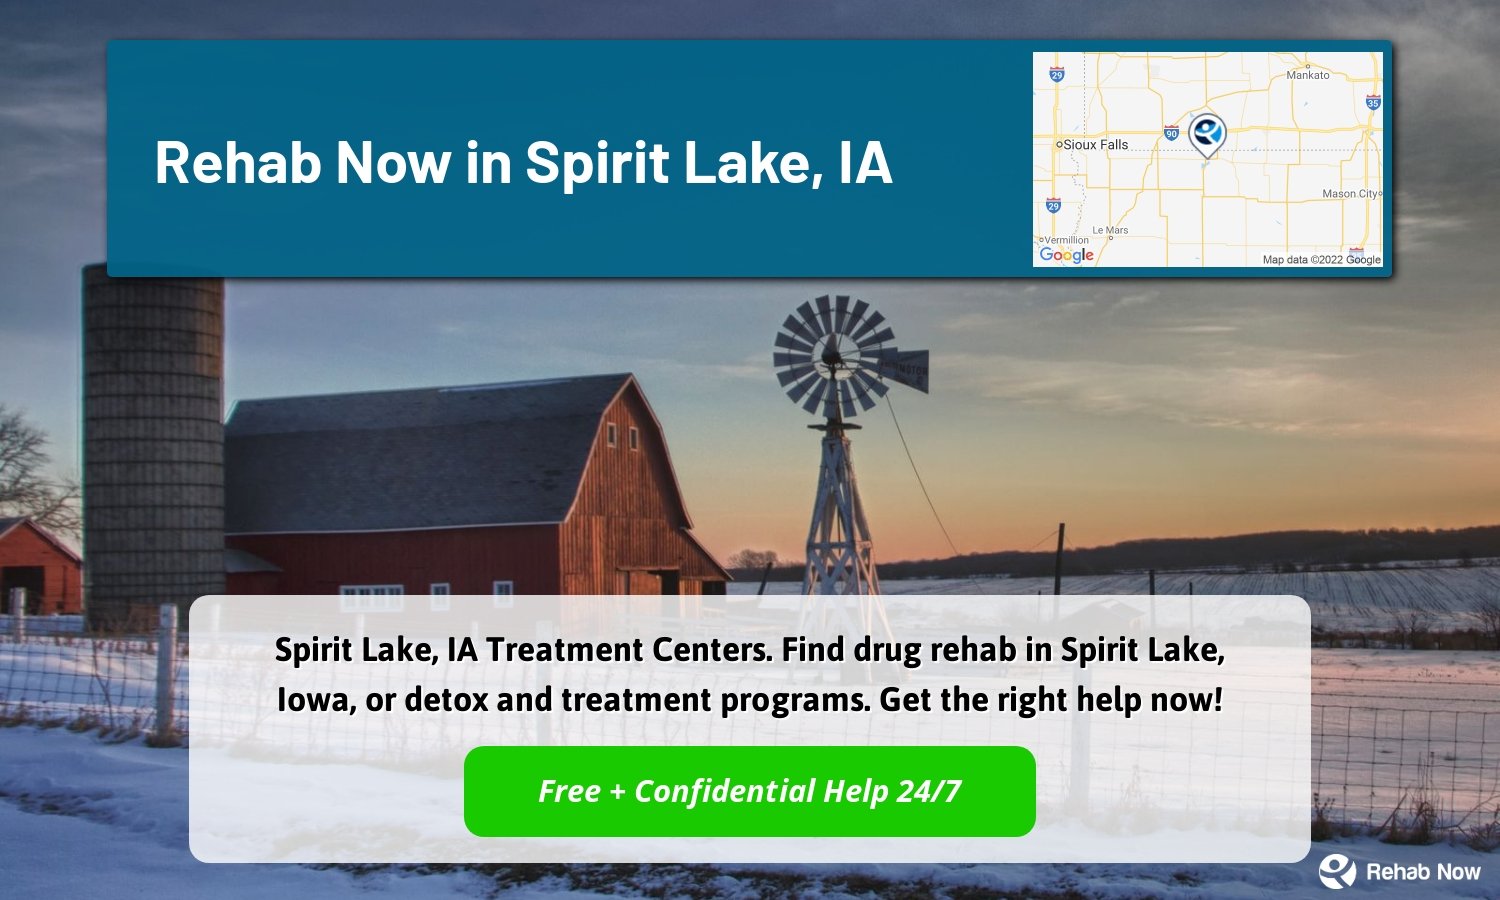 Spirit Lake, IA Treatment Centers. Find drug rehab in Spirit Lake, Iowa, or detox and treatment programs. Get the right help now!